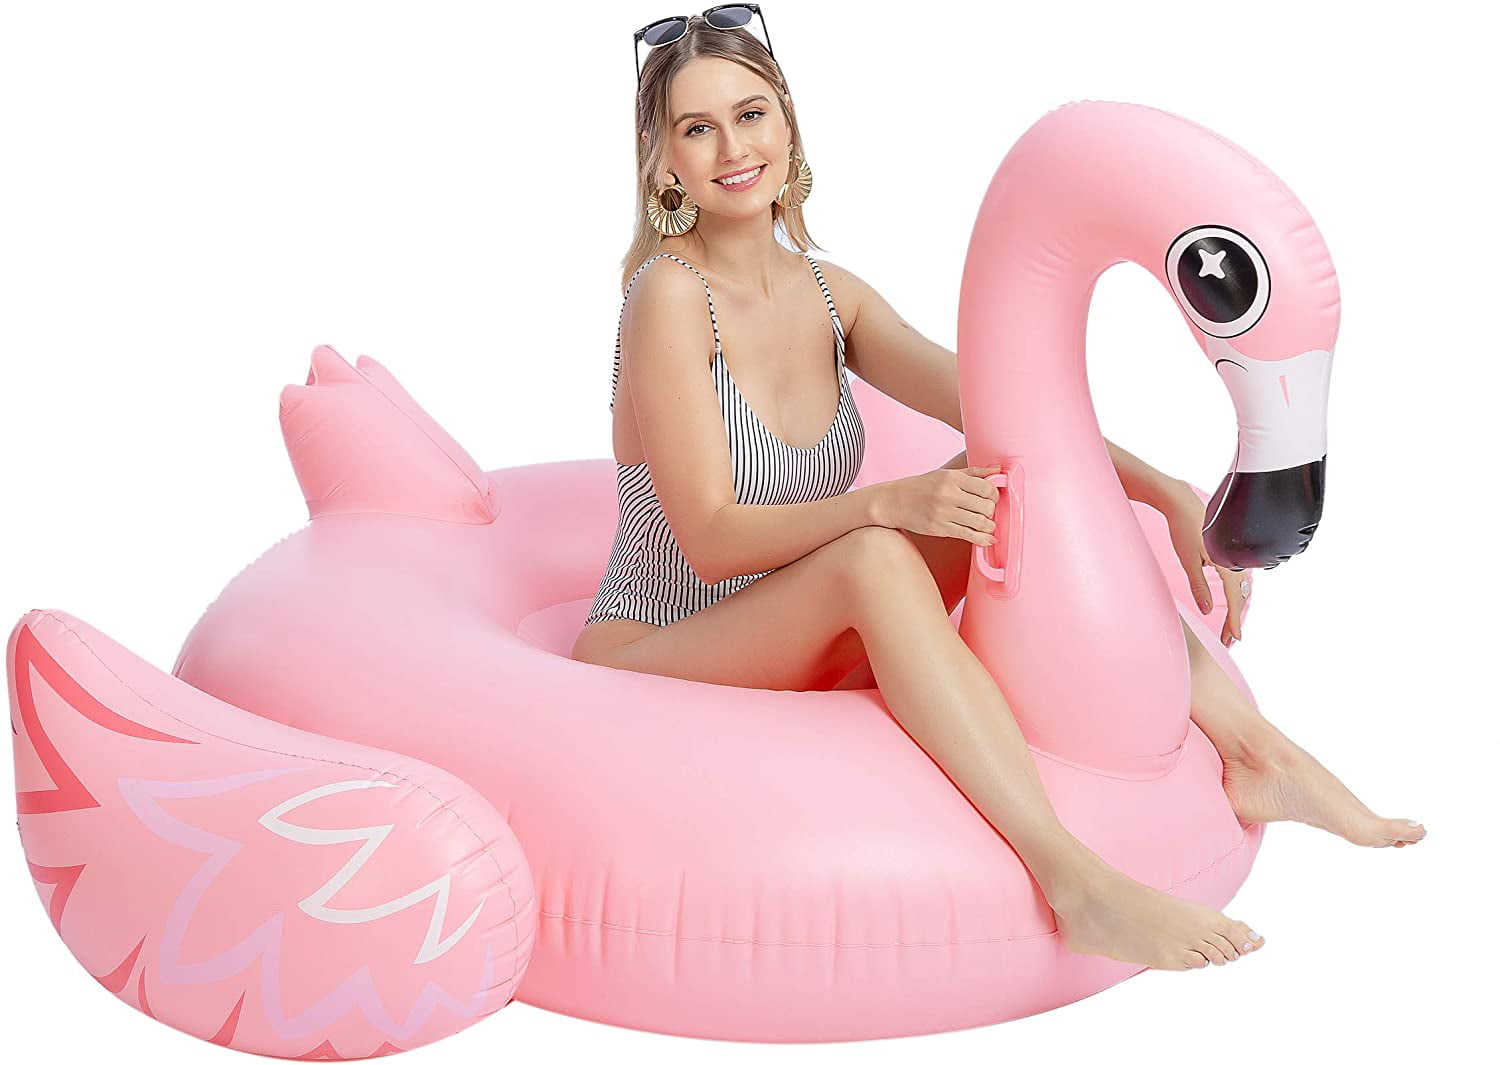 Intera Giant Inflatable Luxurious Flamingo Pool Float, Fun Beach Floaties, Swim Party Toys, Pool Island, Summer Pool Raft Lounge for Adults & Kids